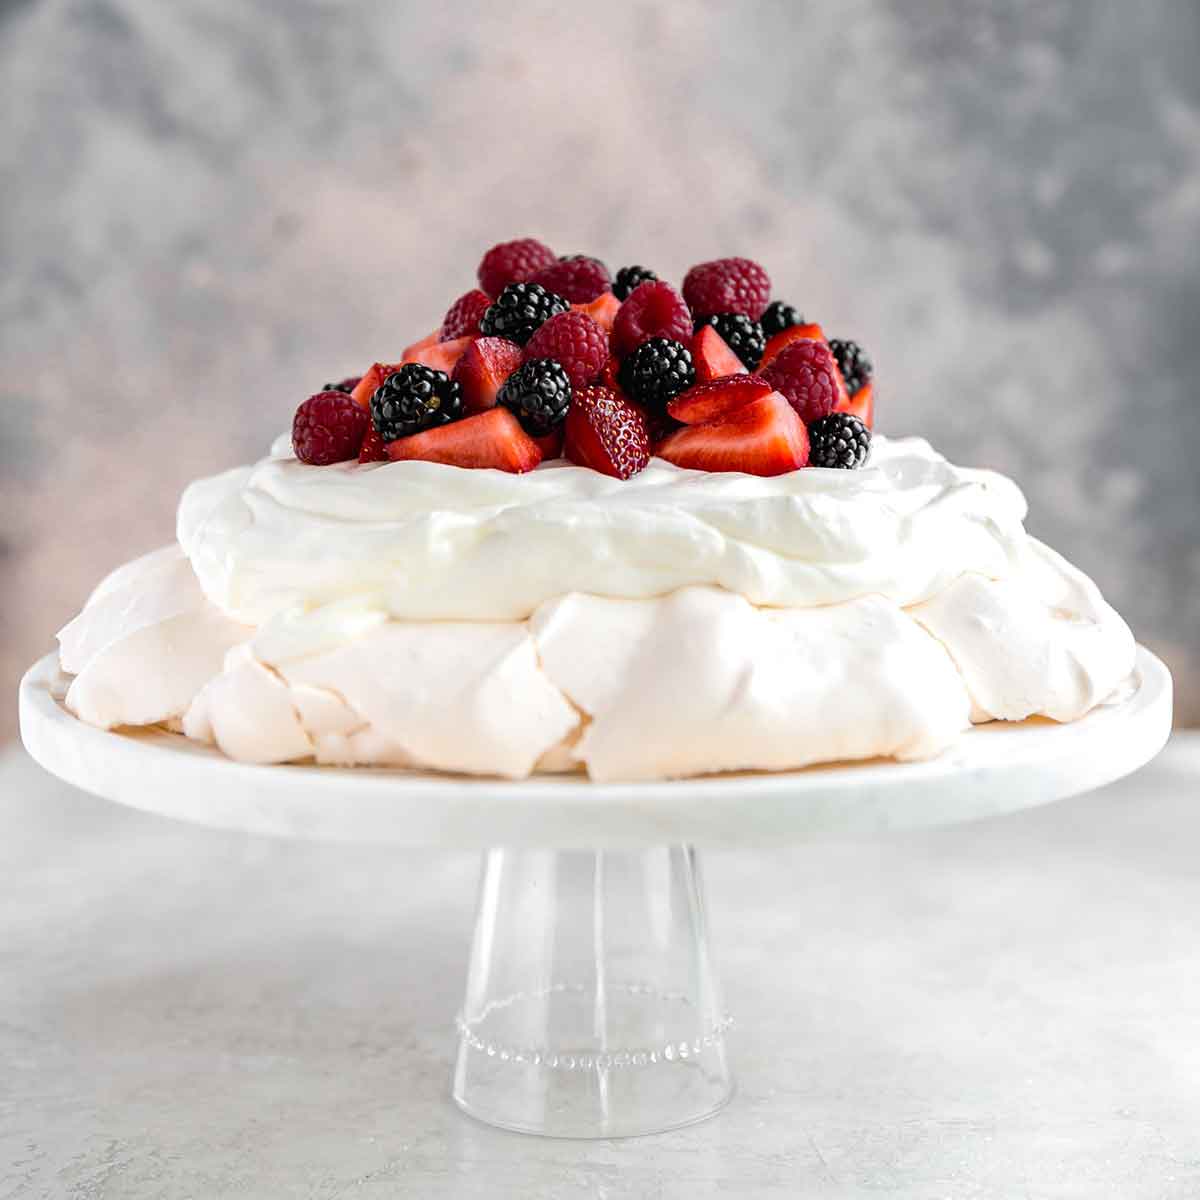 Large pavlova on a serving platter topped with whipped cream and fresh berries.